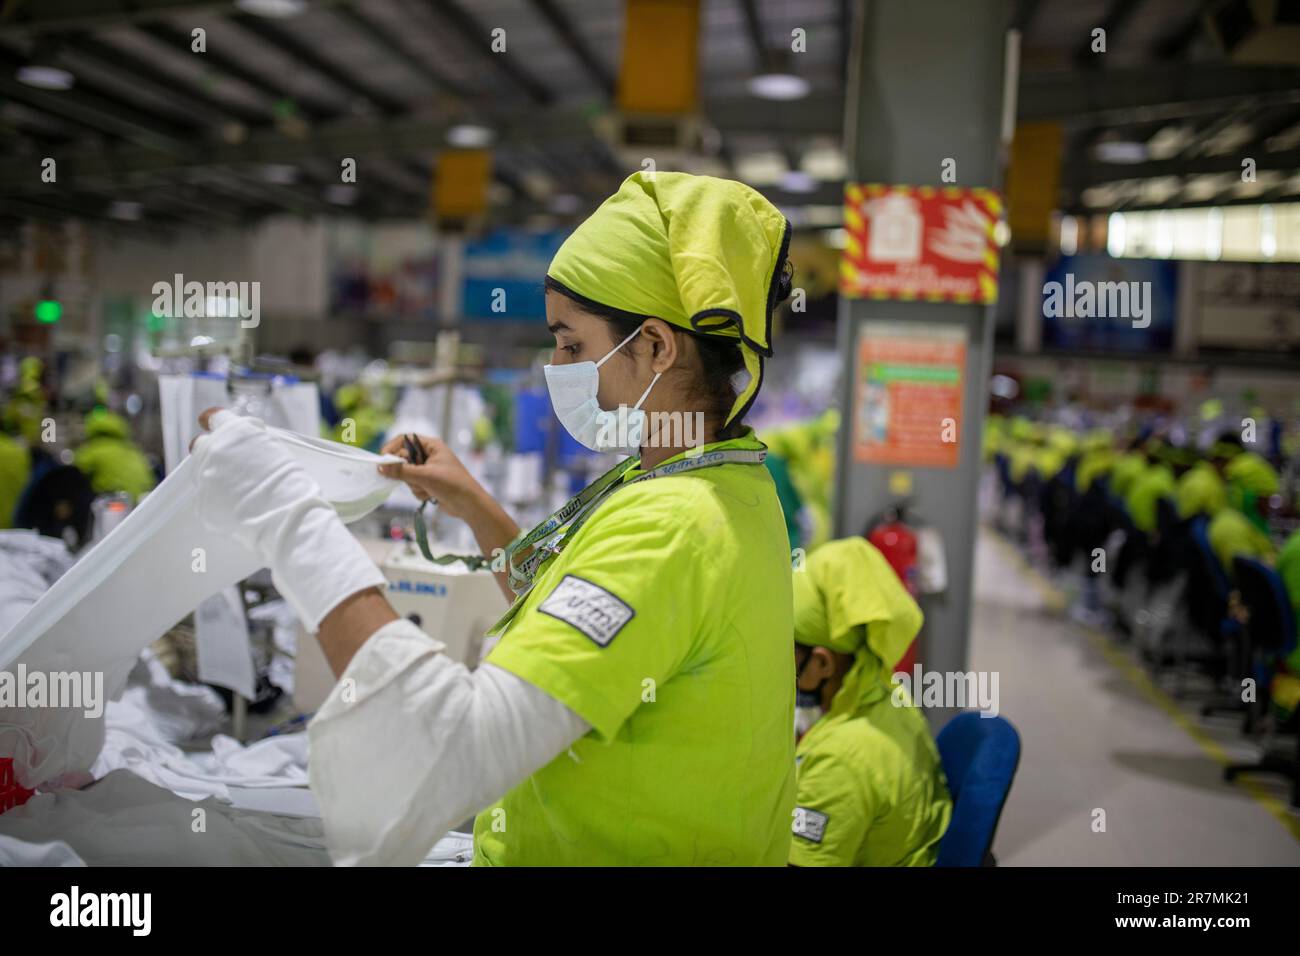 Ready-made garments (RMG) workers working in a LEED Certified Green Garment factory at Adamjee Export Processing Zone in Narayanganj, Bangladesh. Stock Photo